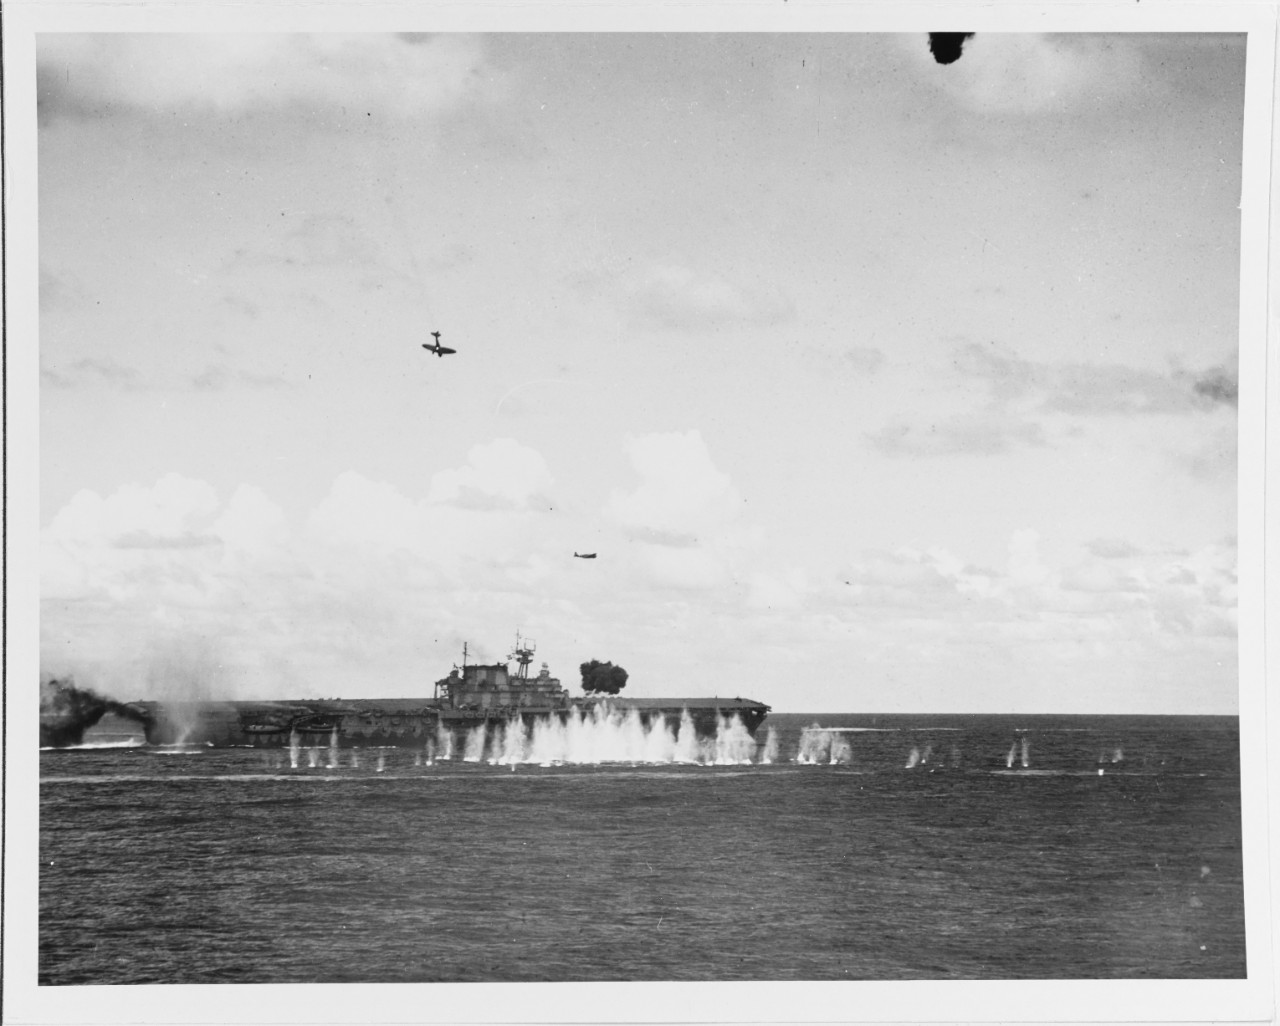 A Japanese Type 99 shipboard bomber (Allied codename Val) trails smoke as it dives toward USS Hornet (CV-8), during the morning of 26 October 1942. This plane struck the ship's stack and then her flight deck. A Type 97 shipboard attack plane (Kate) is flying over Hornet after dropping its torpedo, and another Val is off her bow. Note anti-aircraft shell burst between Hornet and the camera, with its fragments striking the water nearby. Official U.S. Navy Photograph, now in the collections of the U.S. National Archives.